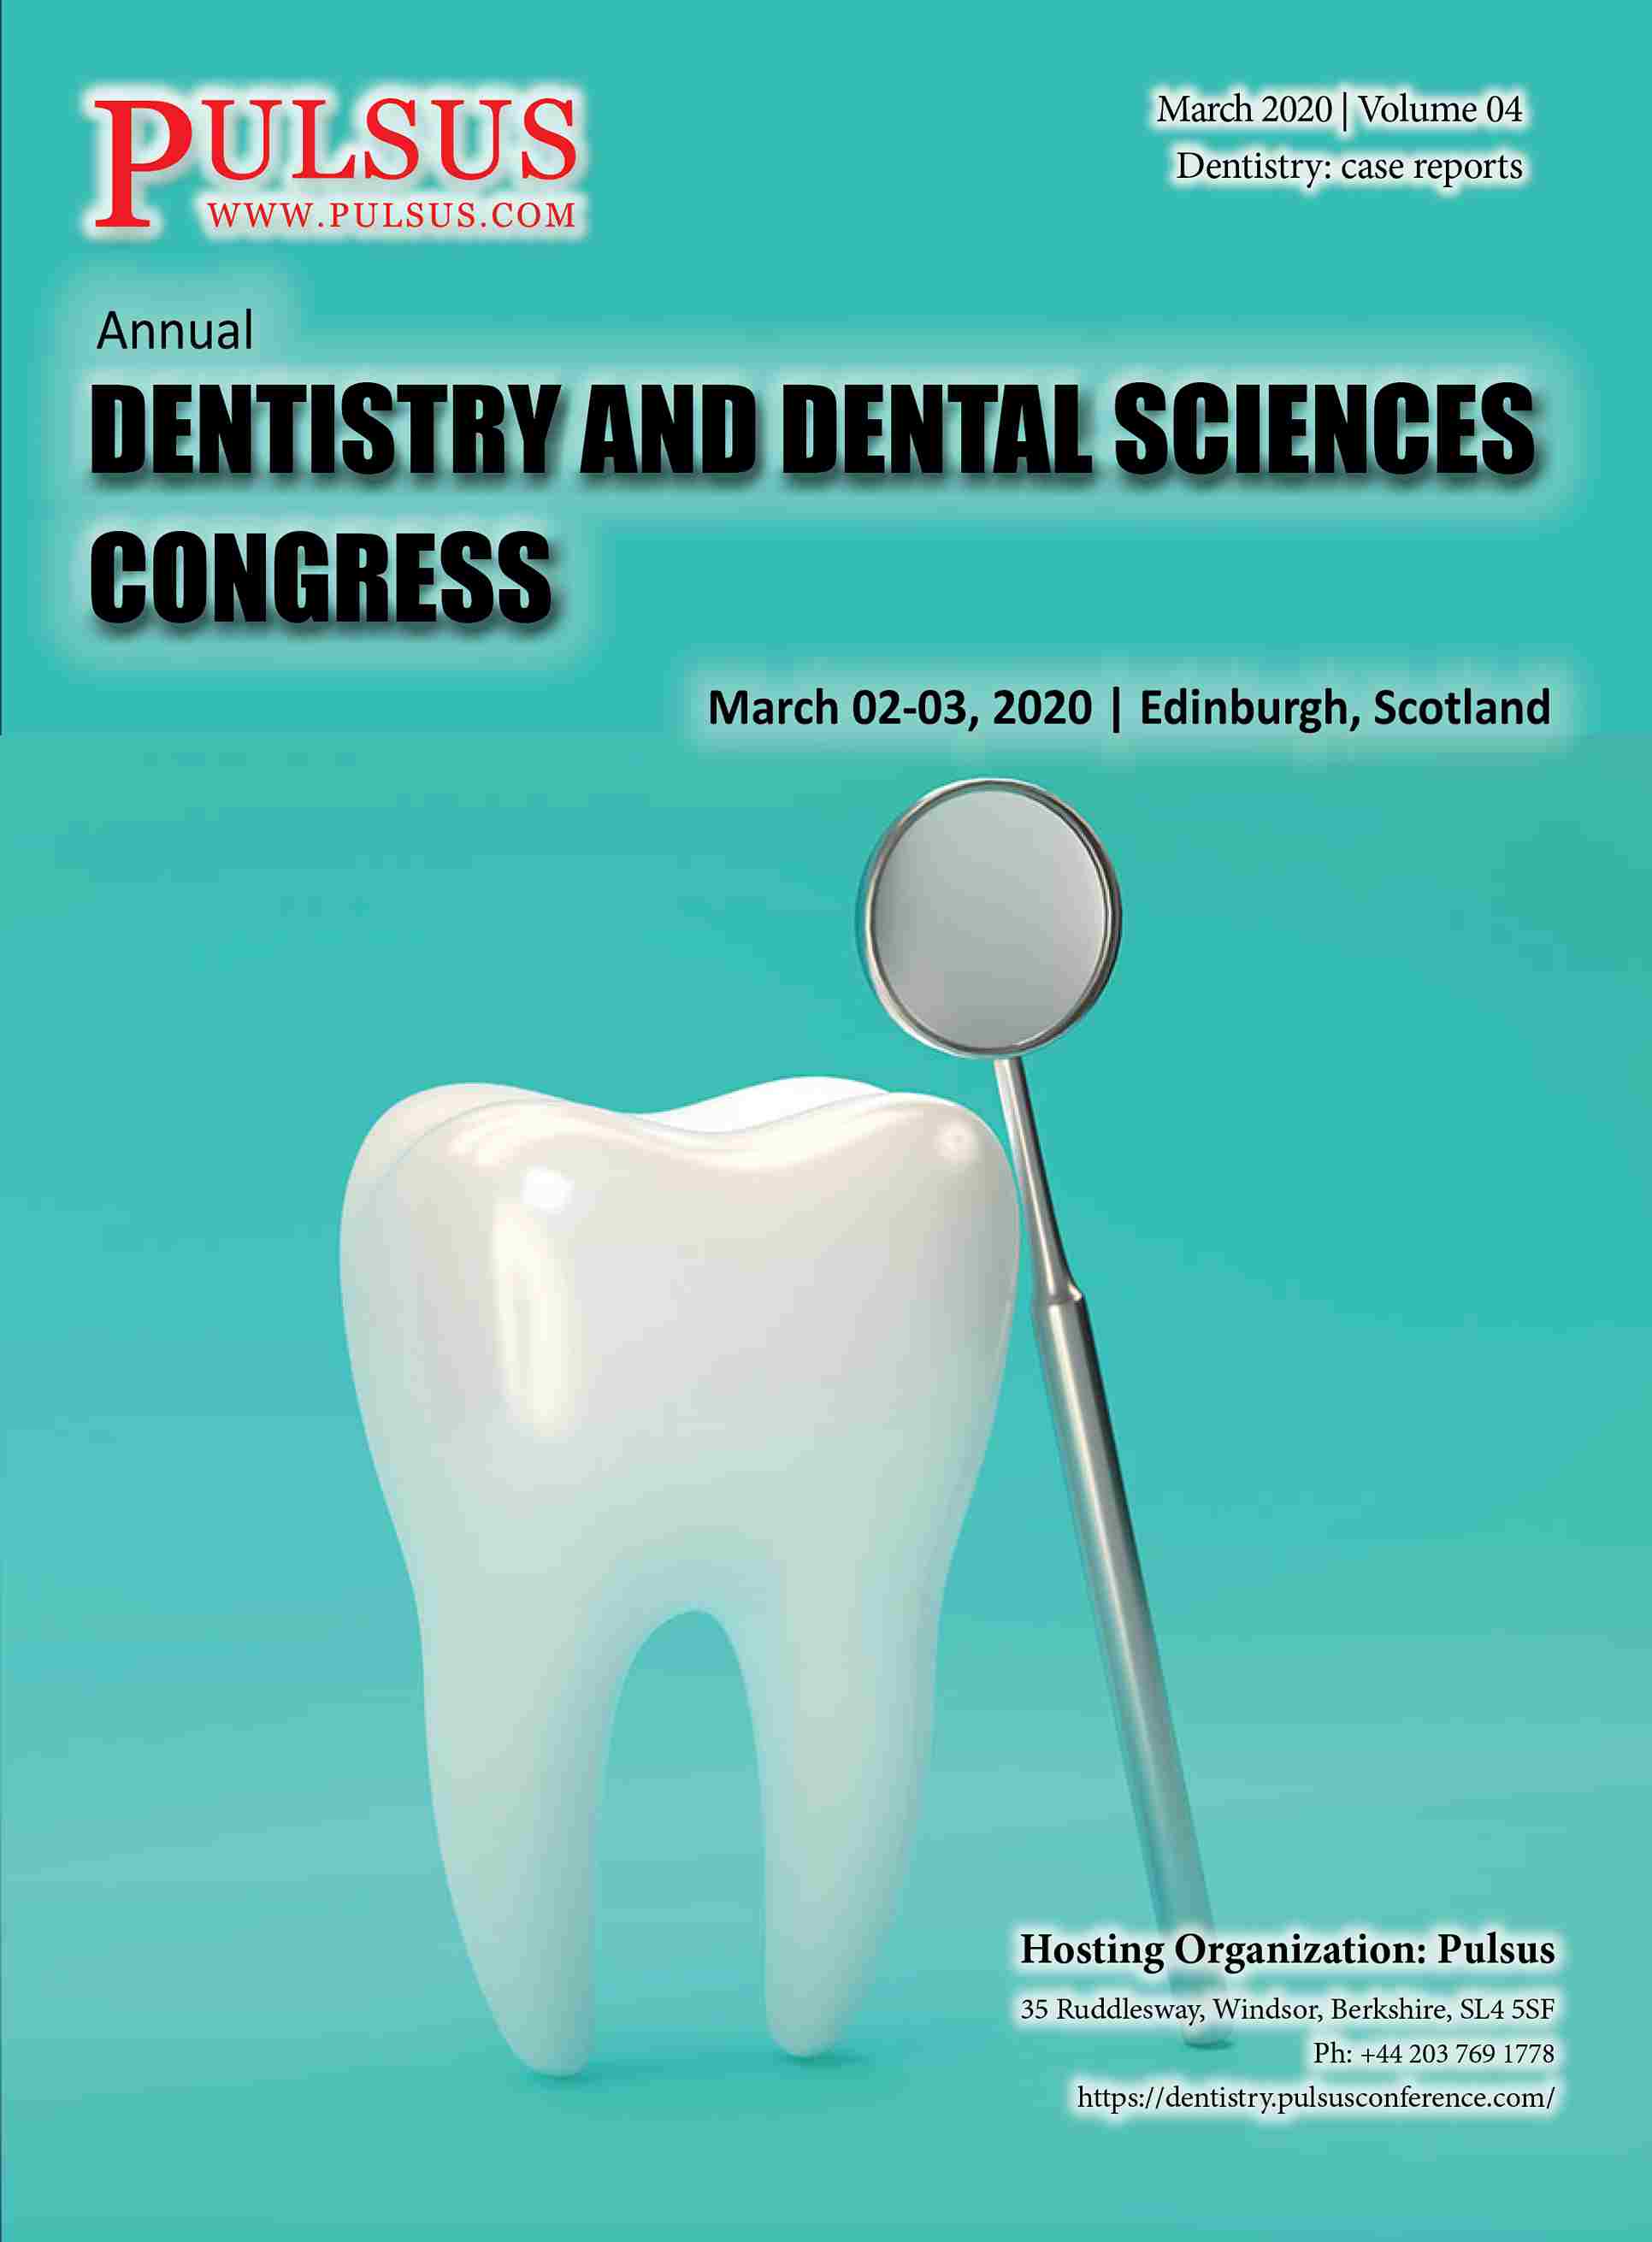 https://www.pulsus.com/conference-abstracts/dentistry-march-2020-proceedings.html